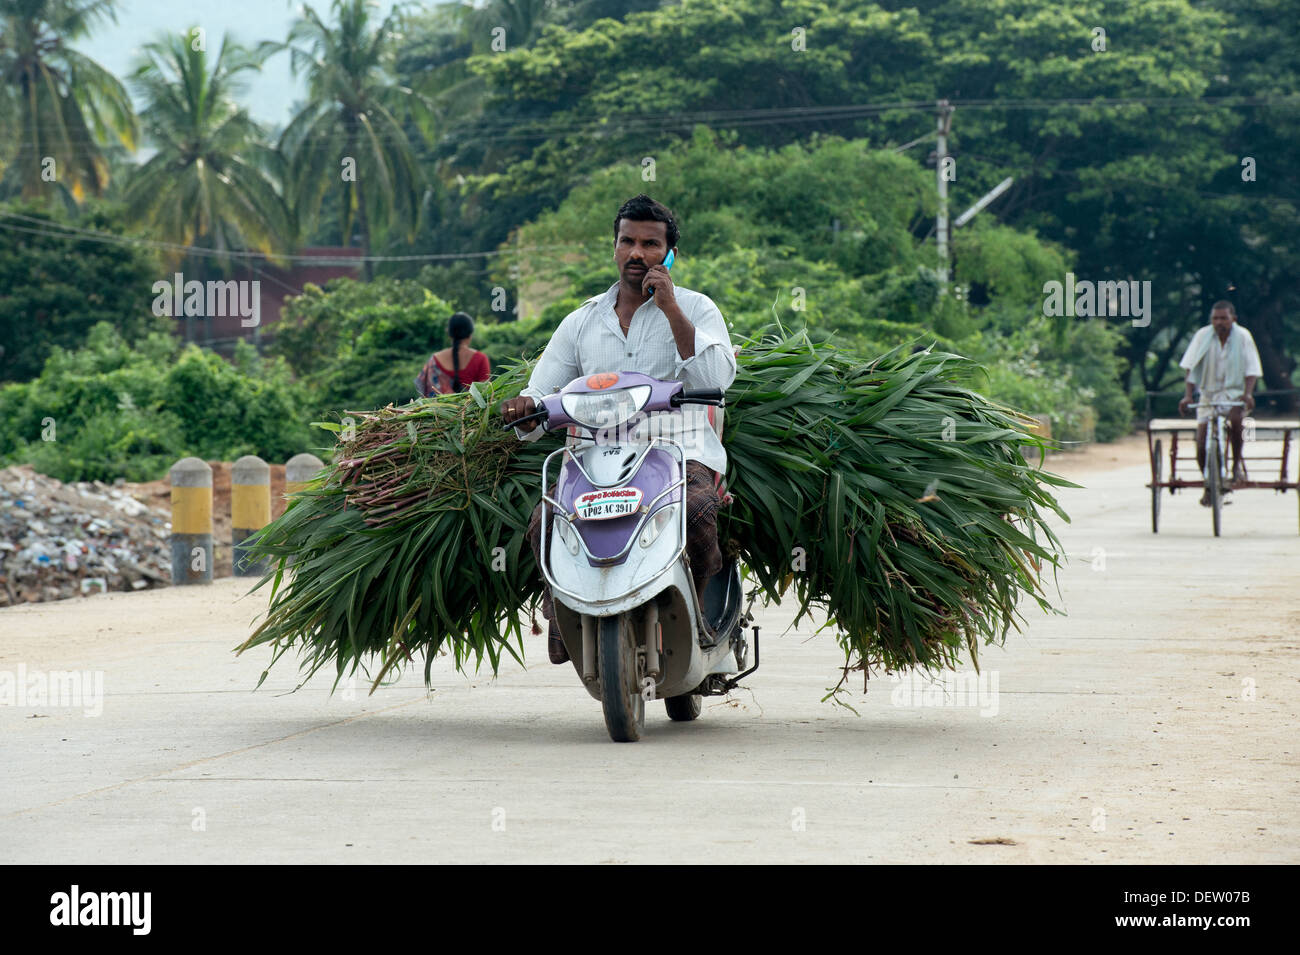 Indian man on a motorcycle on his mobile phone whilst carrying cut plants. Andhra Pradesh, India Stock Photo